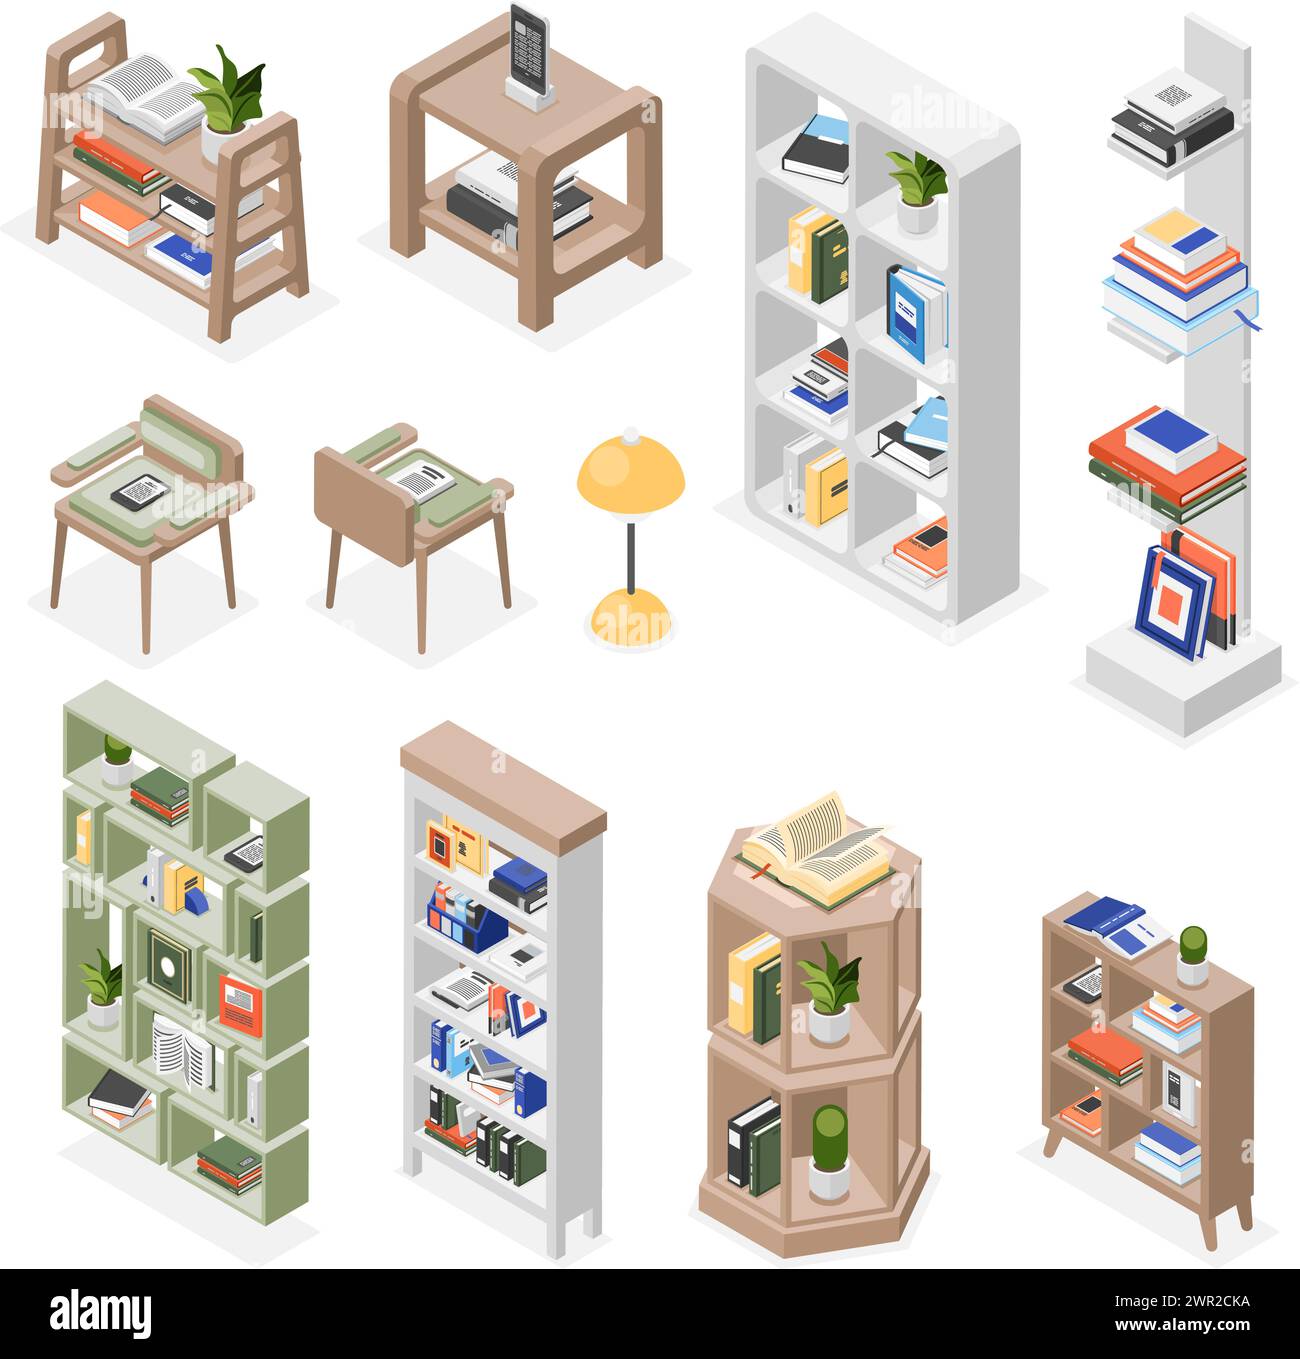 Isometric bookshelves. Library furniture, shelf and chairs. Book piles on shelves. School or university, bookstore equipment. Interior flawless vector Stock Vector